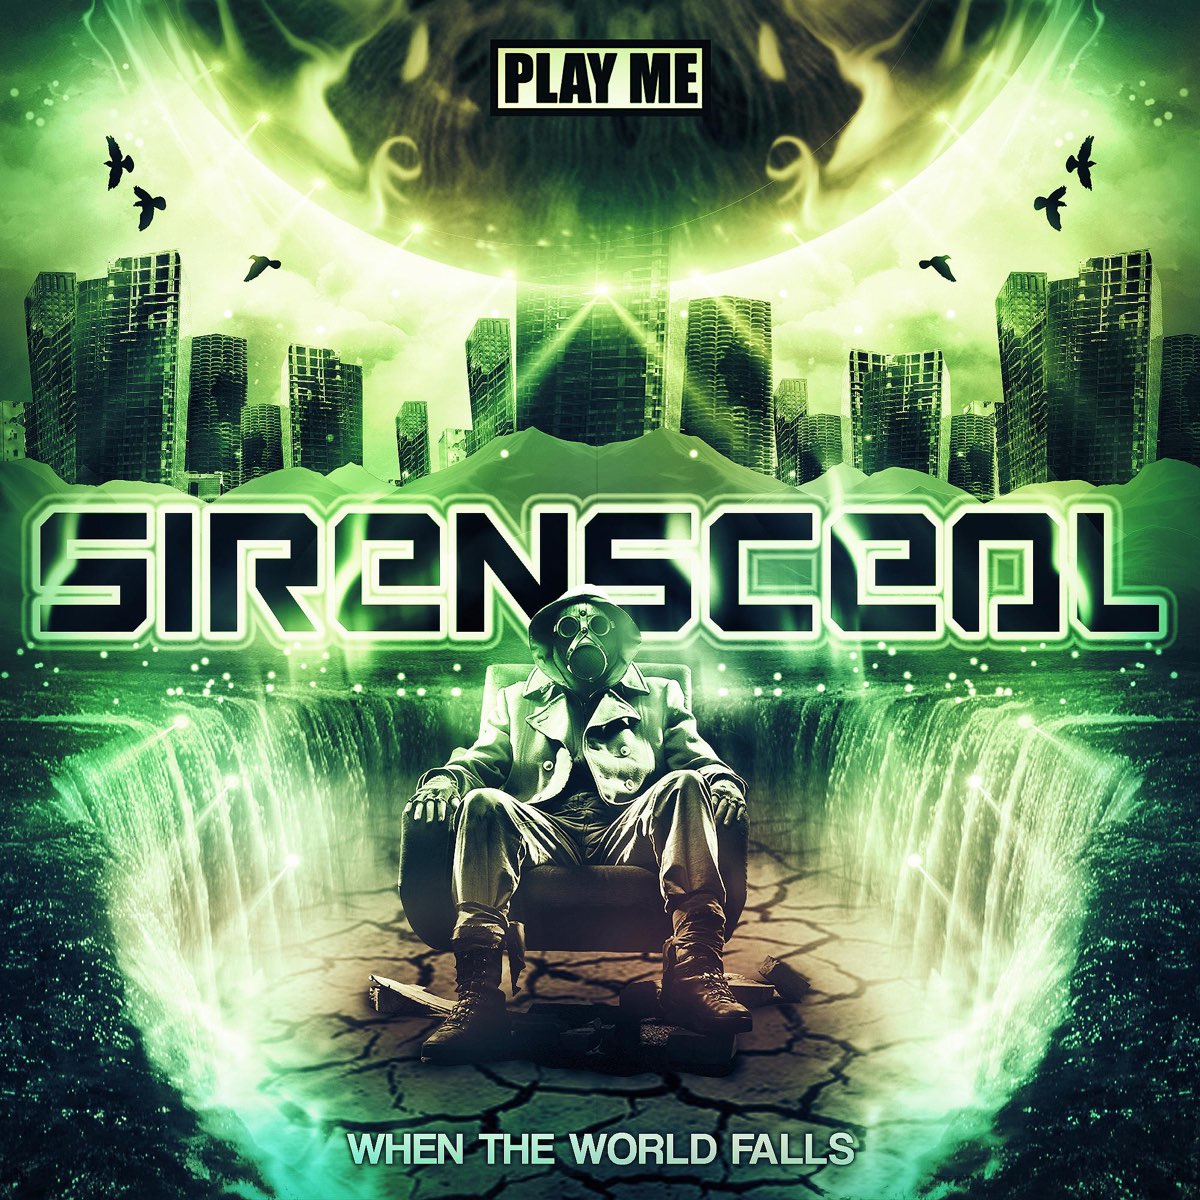 The world is falling. SIRENSCEOL. SIRENSCEOL Let you know. When the World Falls down.